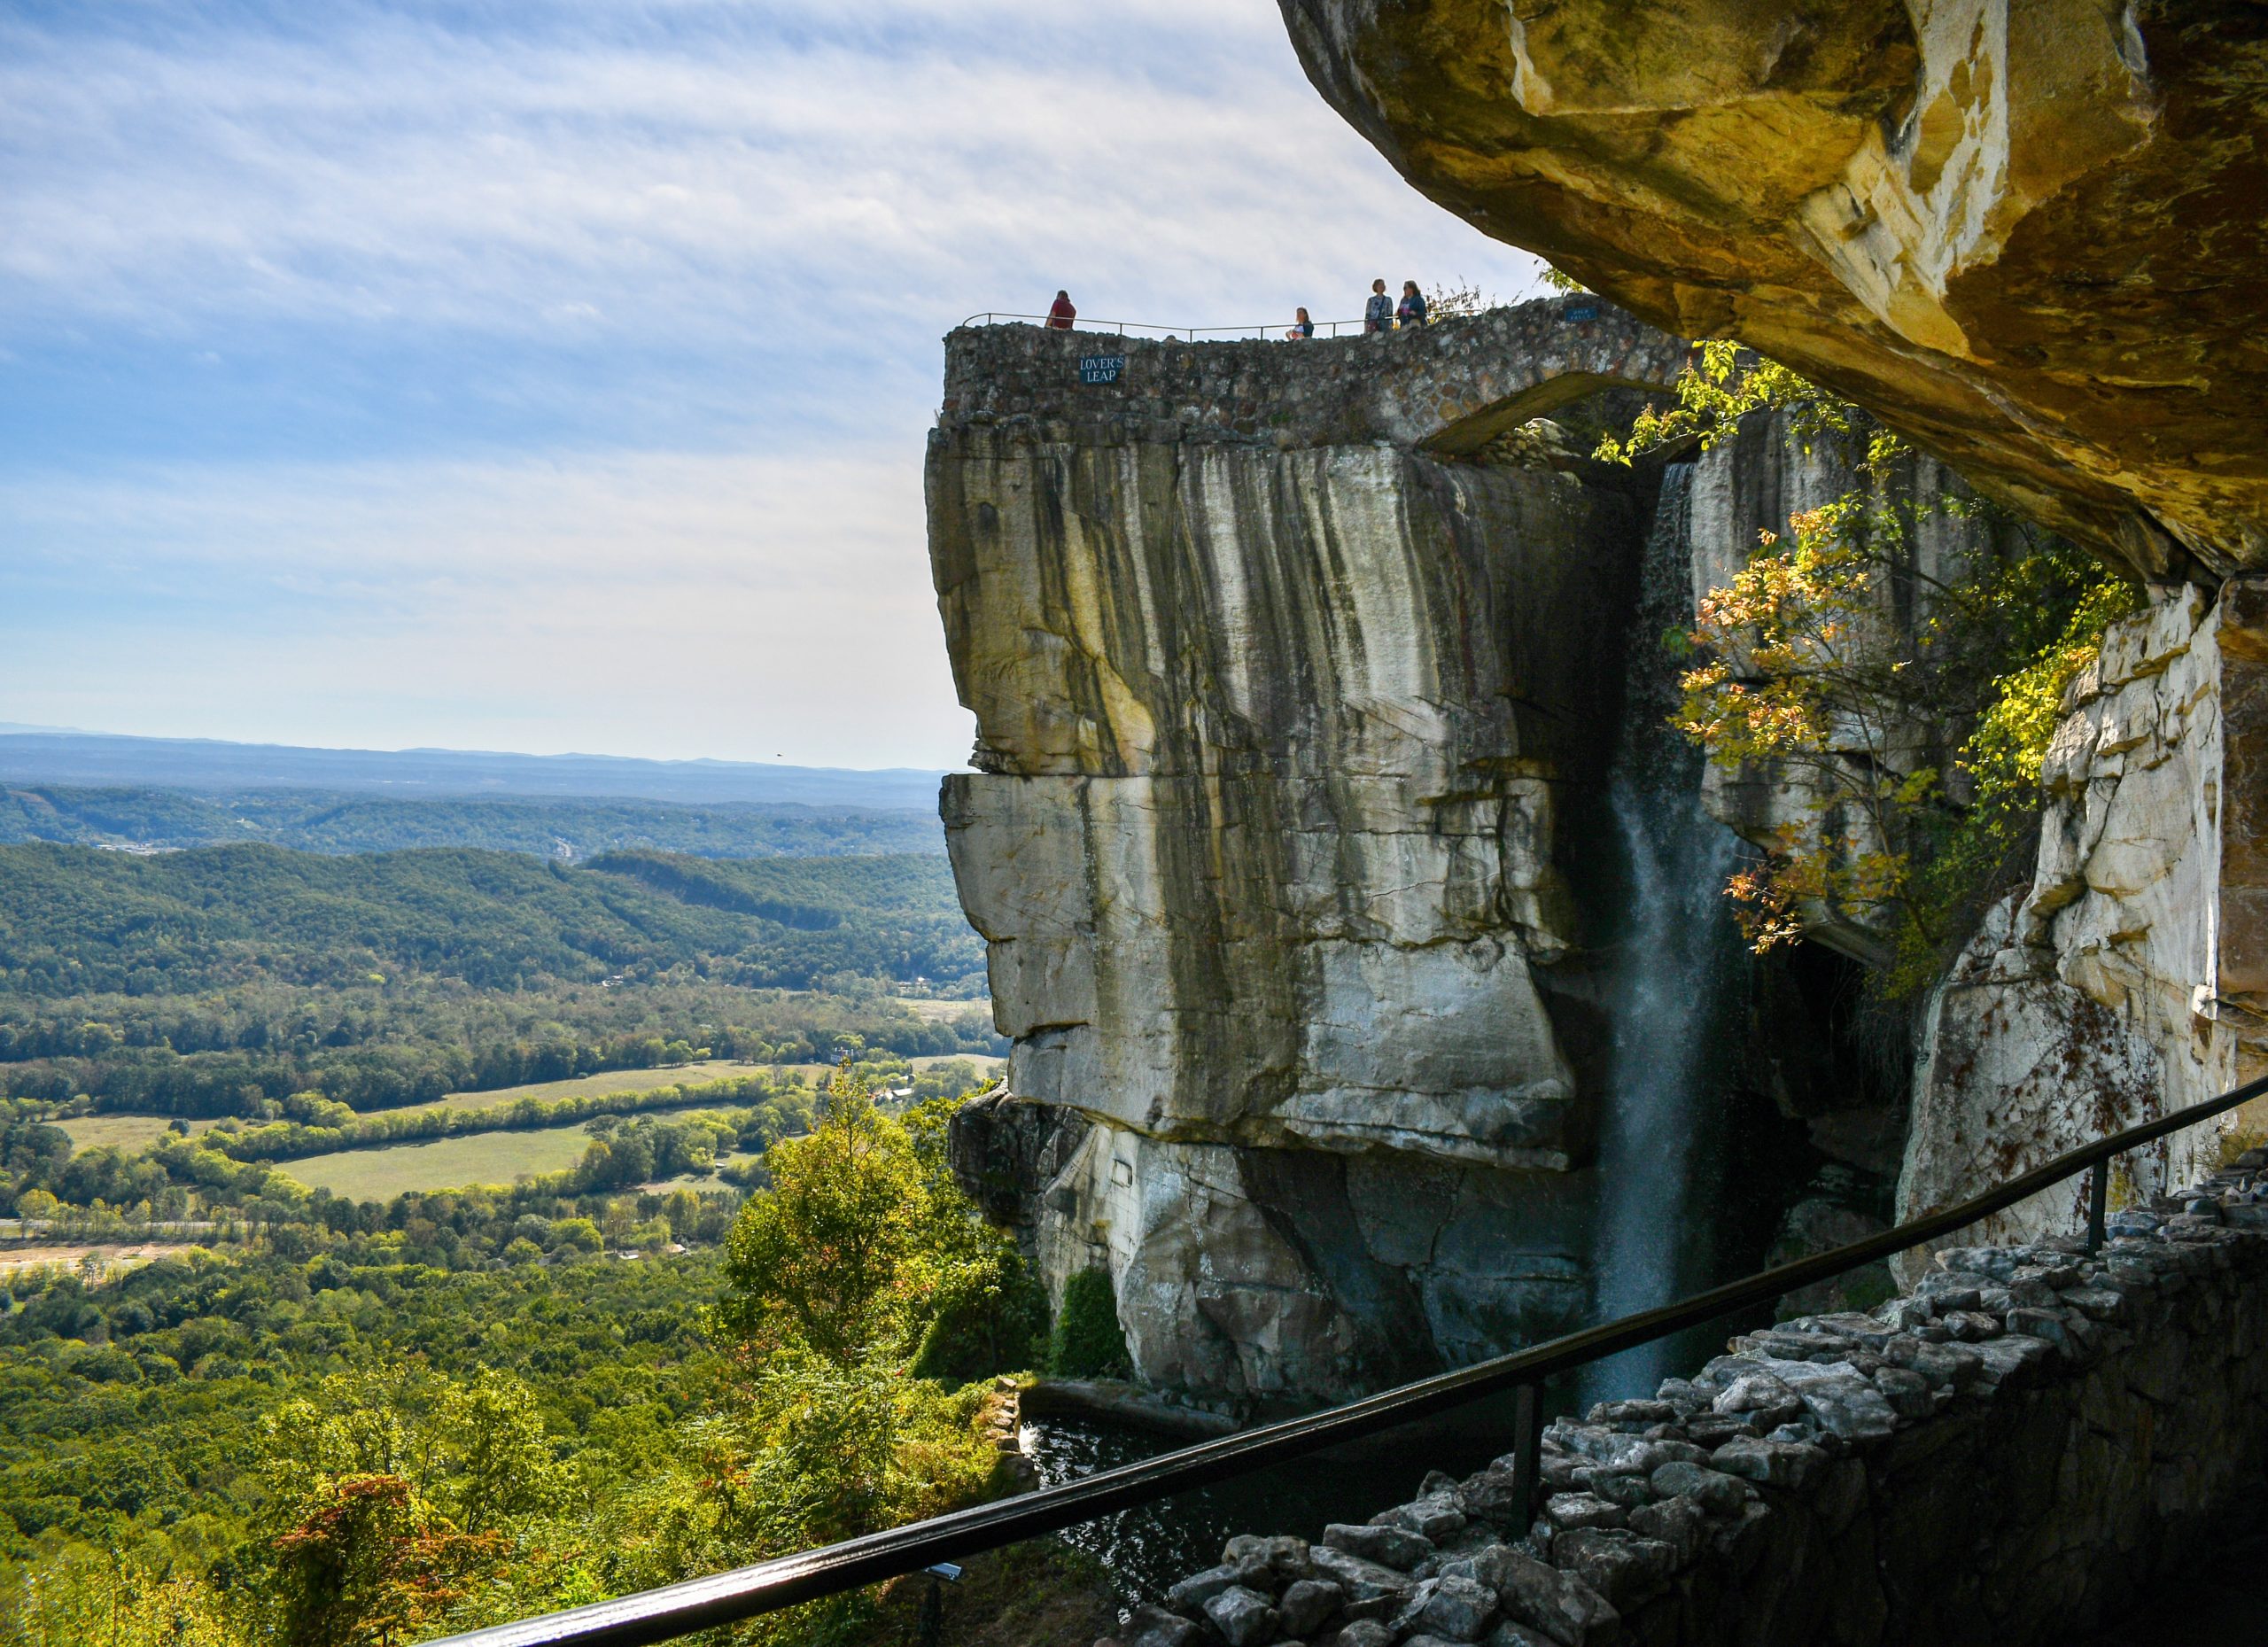 Day Trip to Lookout Mountain – Rock City